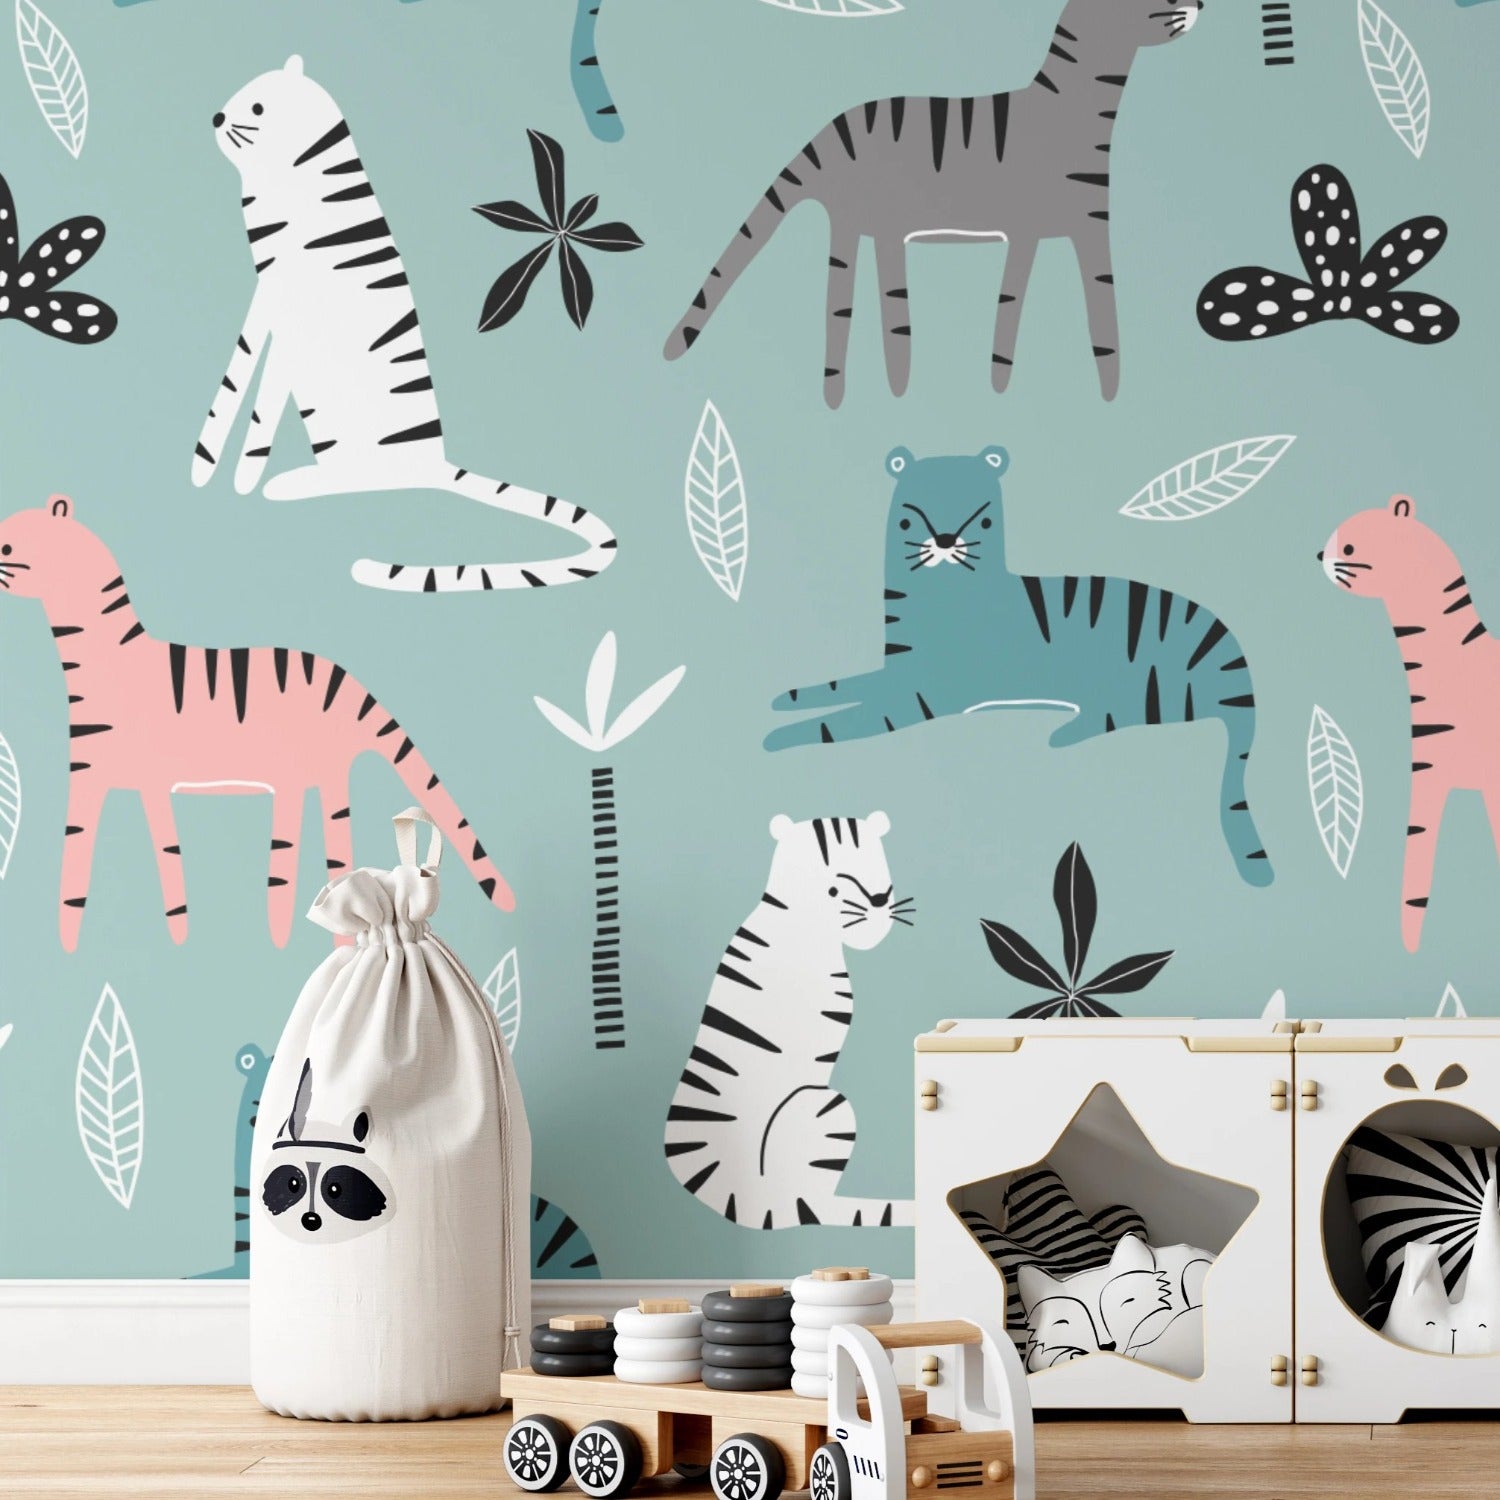 Full room view of Kids Wallpaper - Tigers in a nursery with toys and furniture complementing the colorful tiger theme